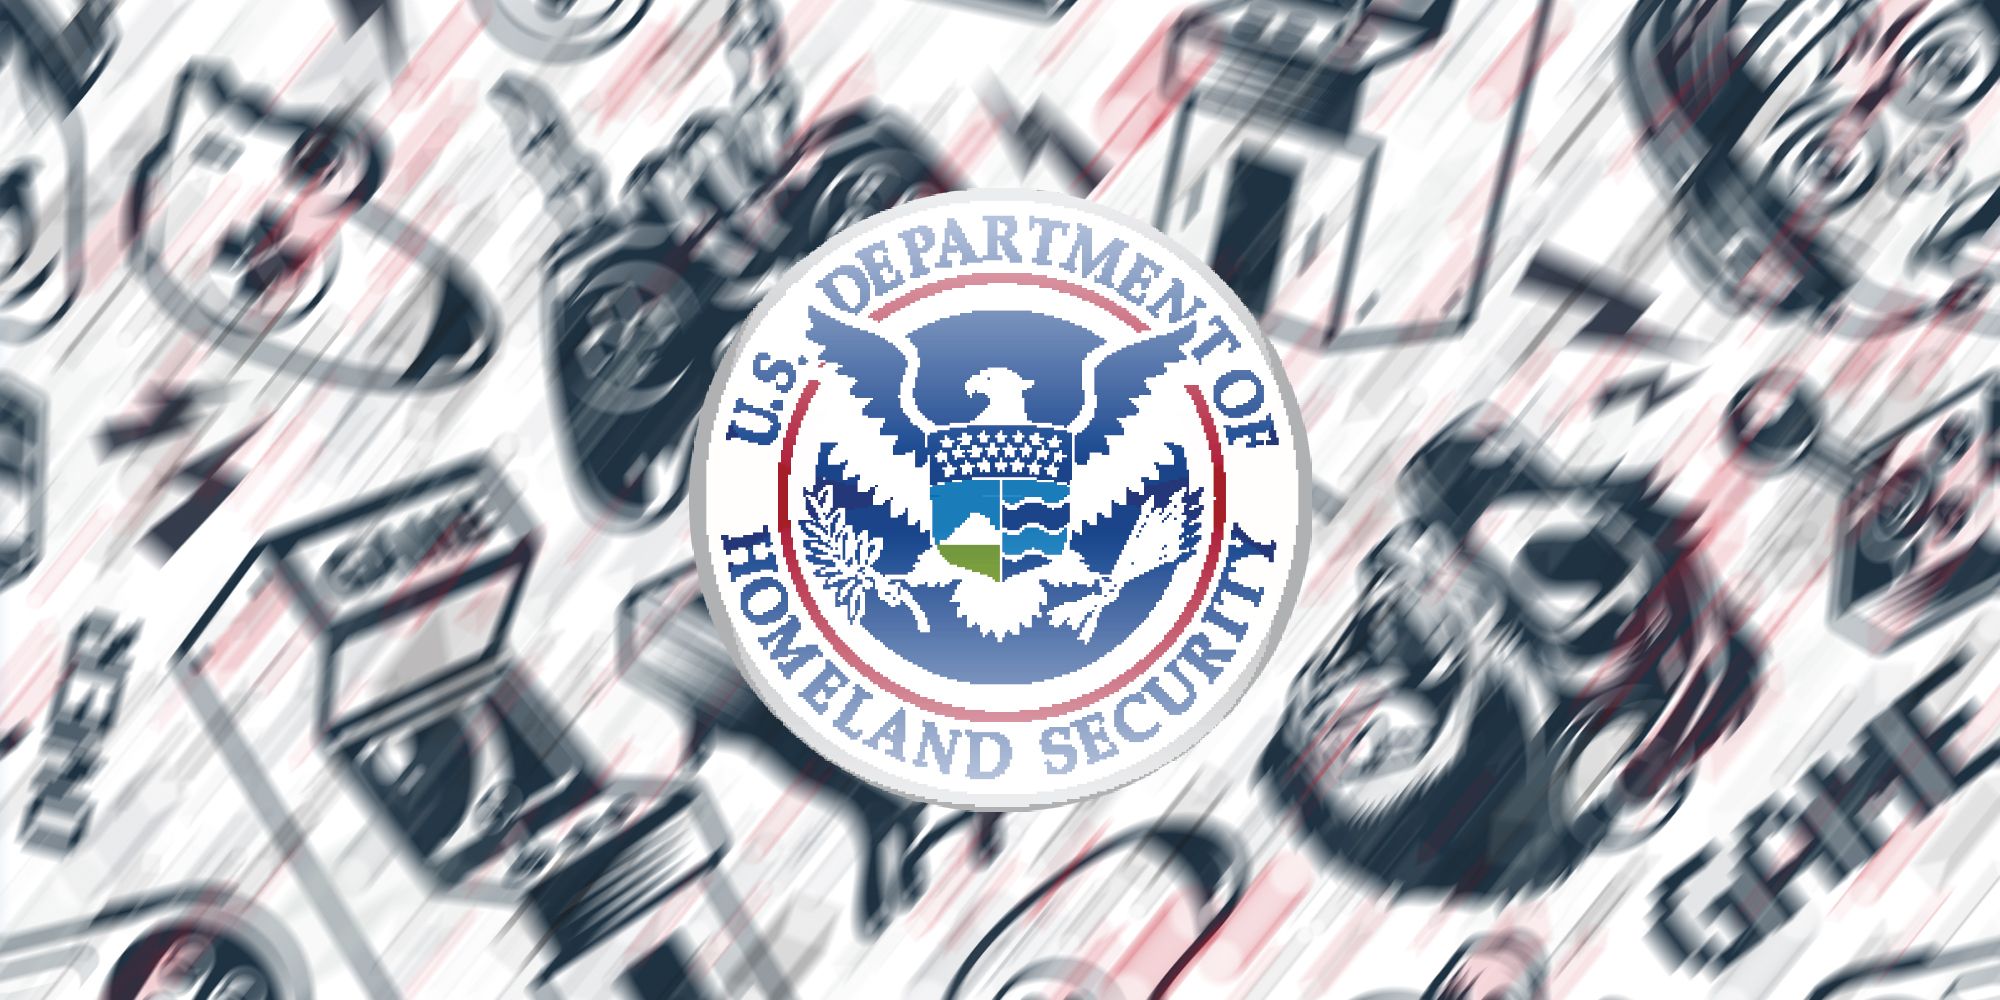 Homeland Security logo over gaming decals